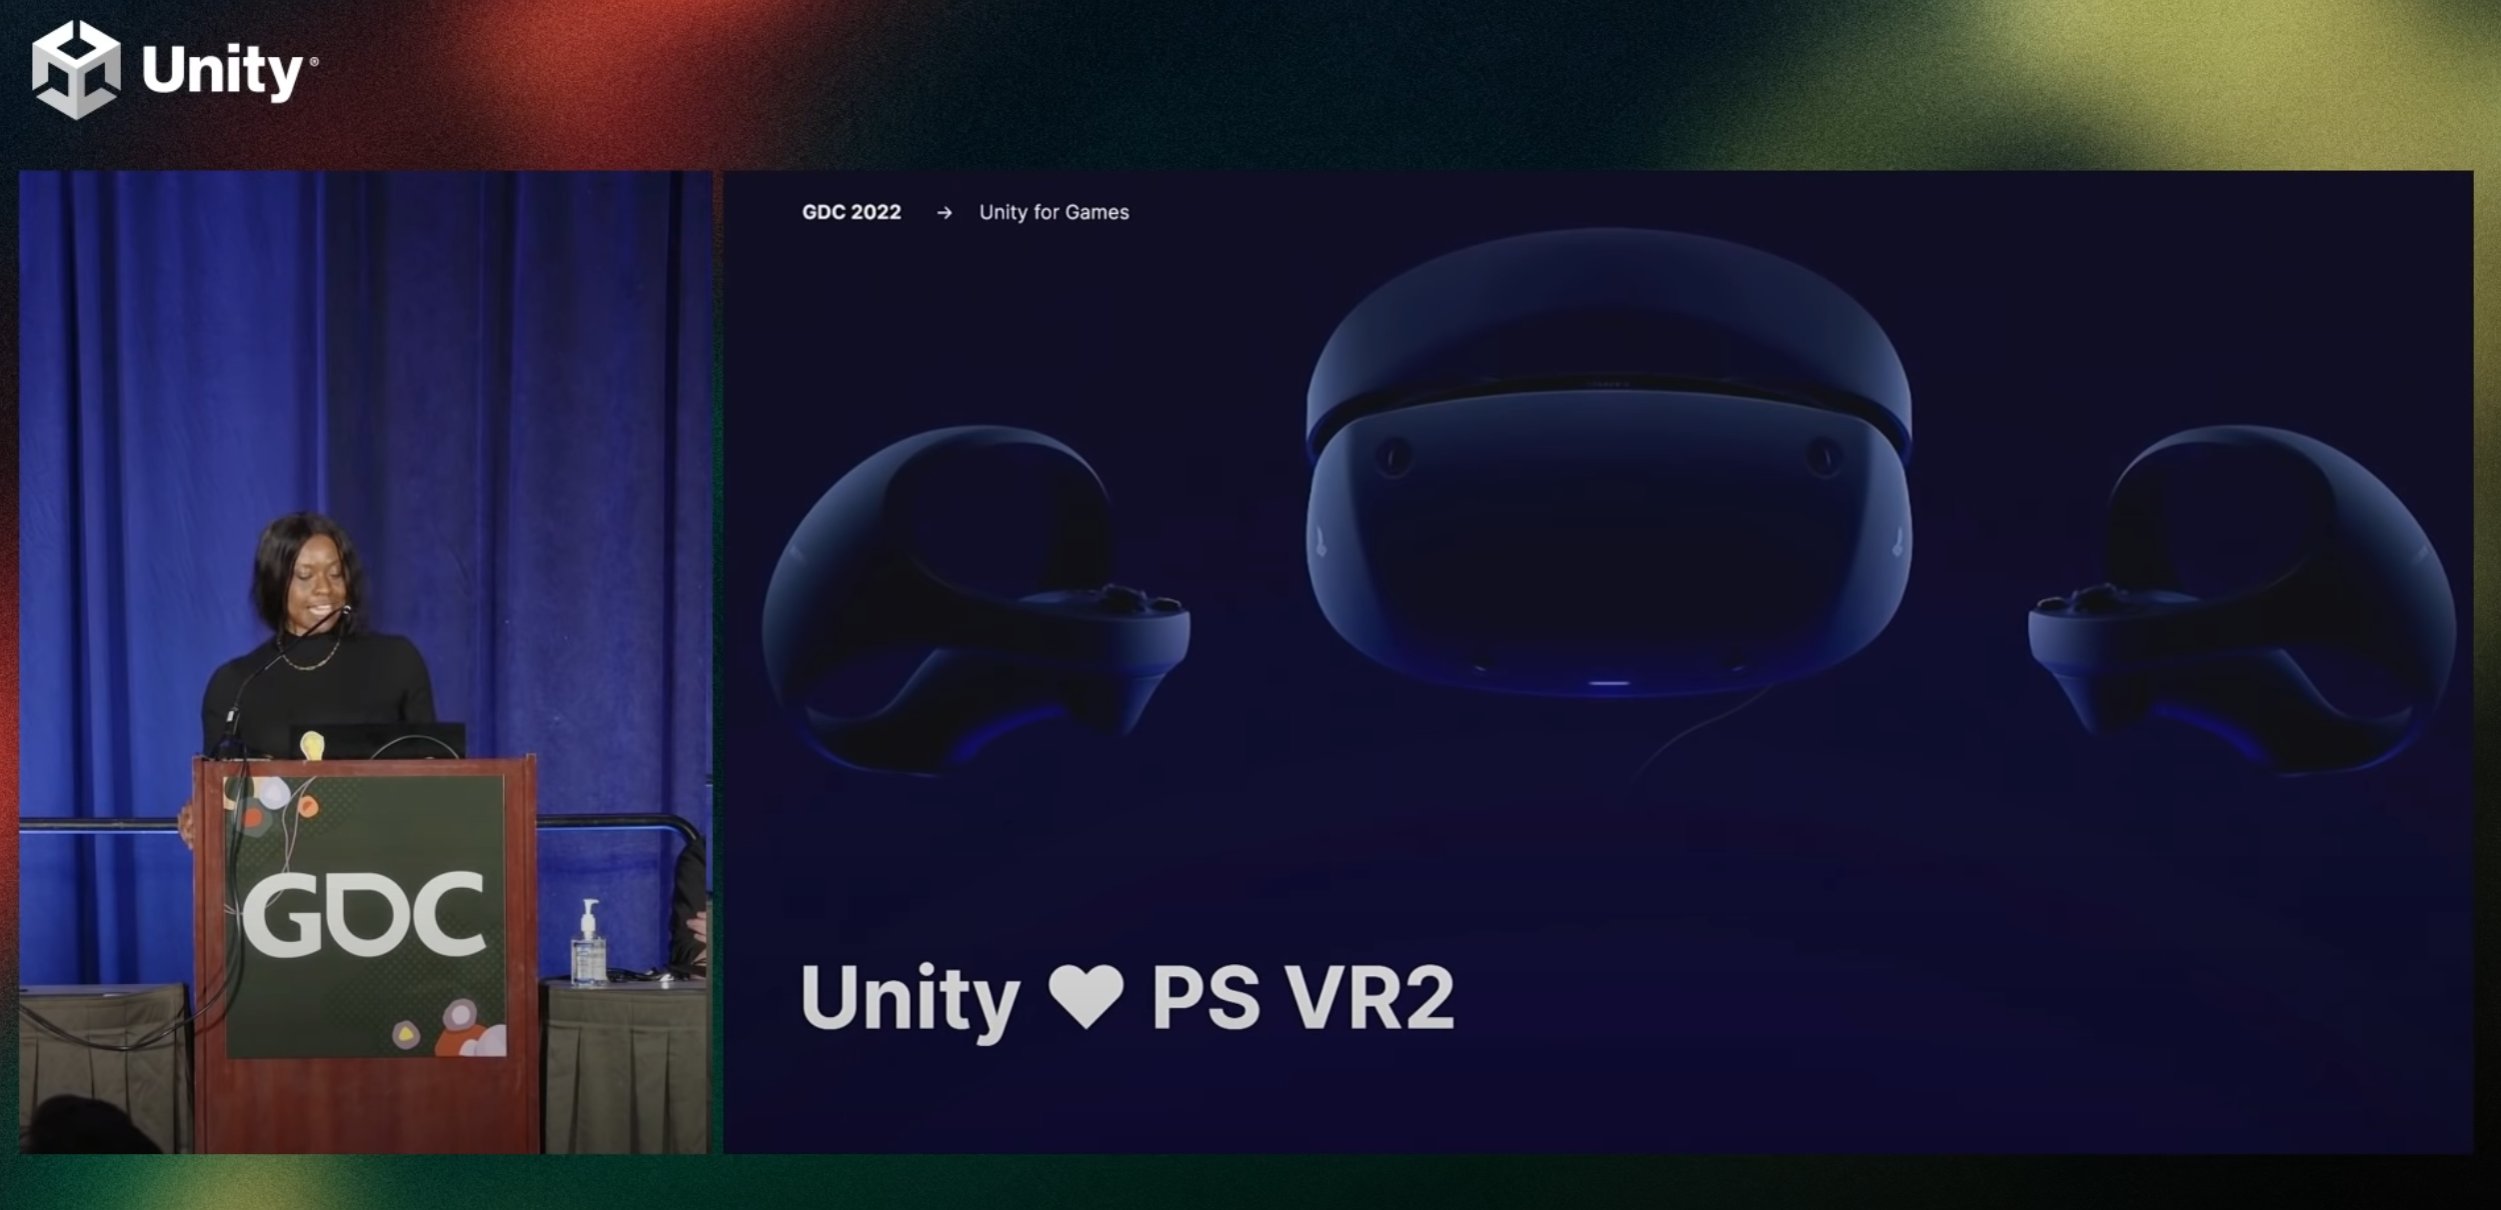 Zuby_Tech on Twitter: Next-Gen Games For PlayStation VR 2 Unity Highlights: -Unity Engine will support PlayStation VR 2 -Underlying development updated for PSVR2 and support for PSVR2 Sense -Render